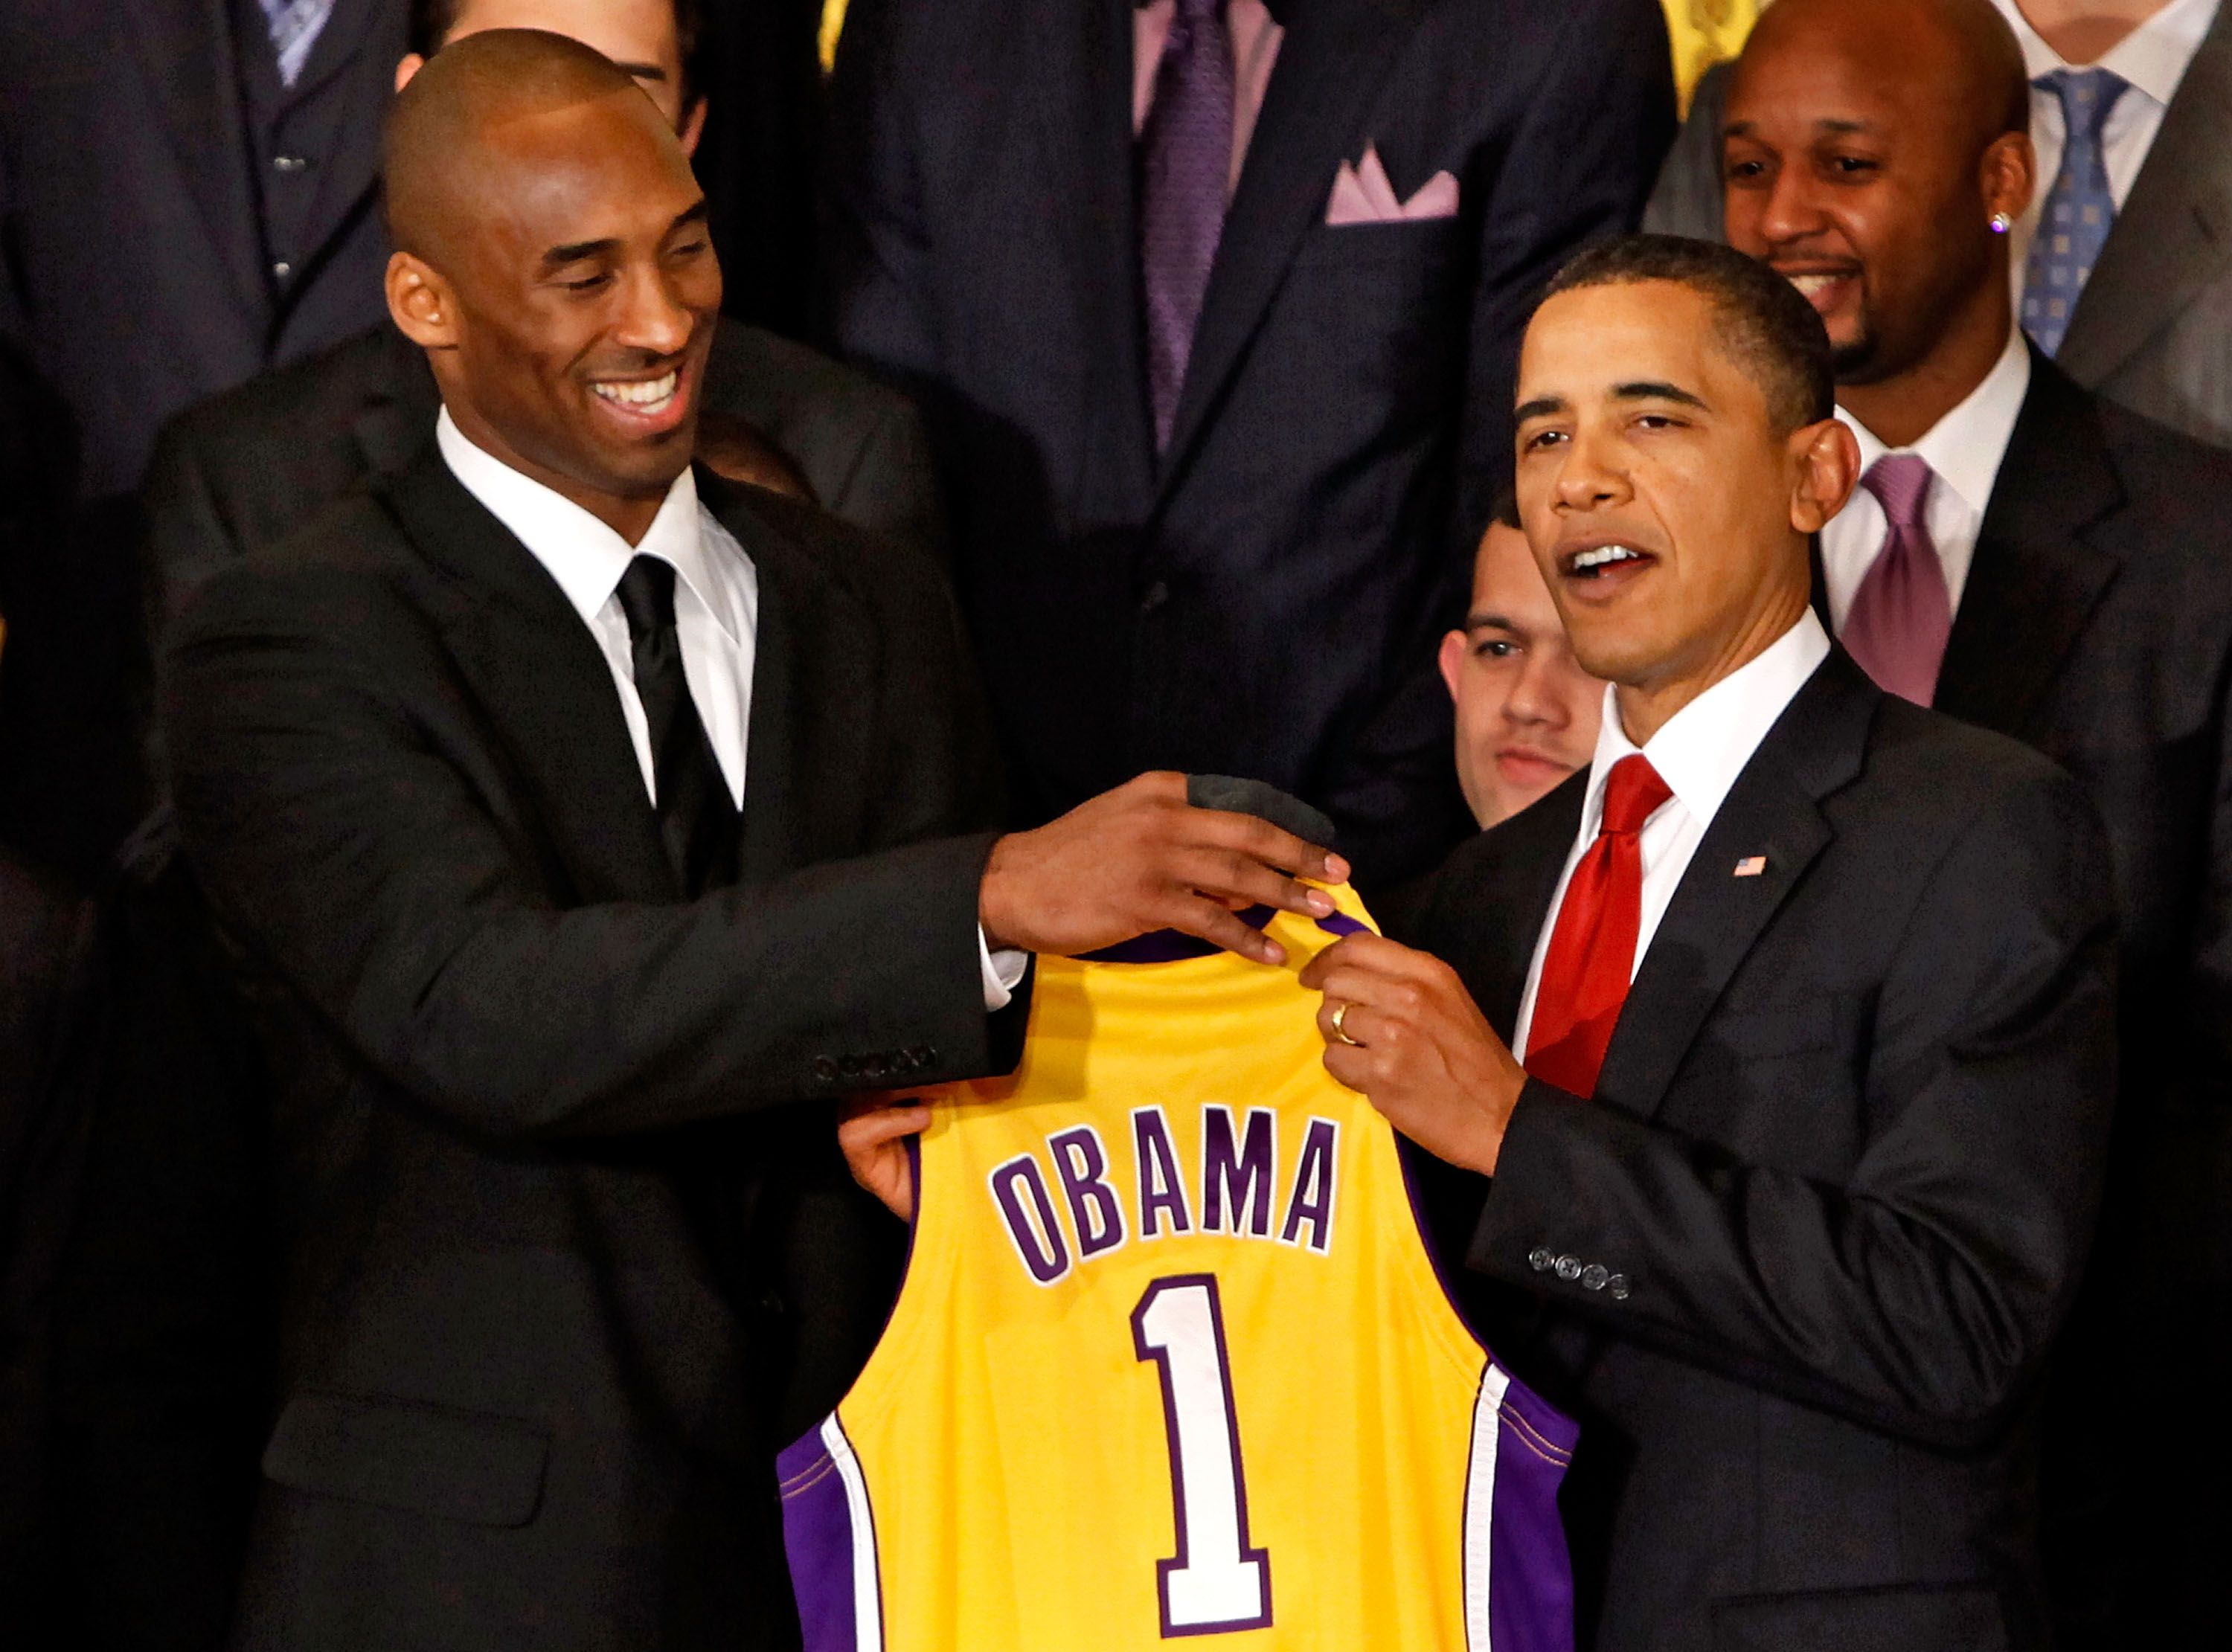 Los Angeles Lakers guard Kobe Bryant (L) presents a jersey to President Barack Obama